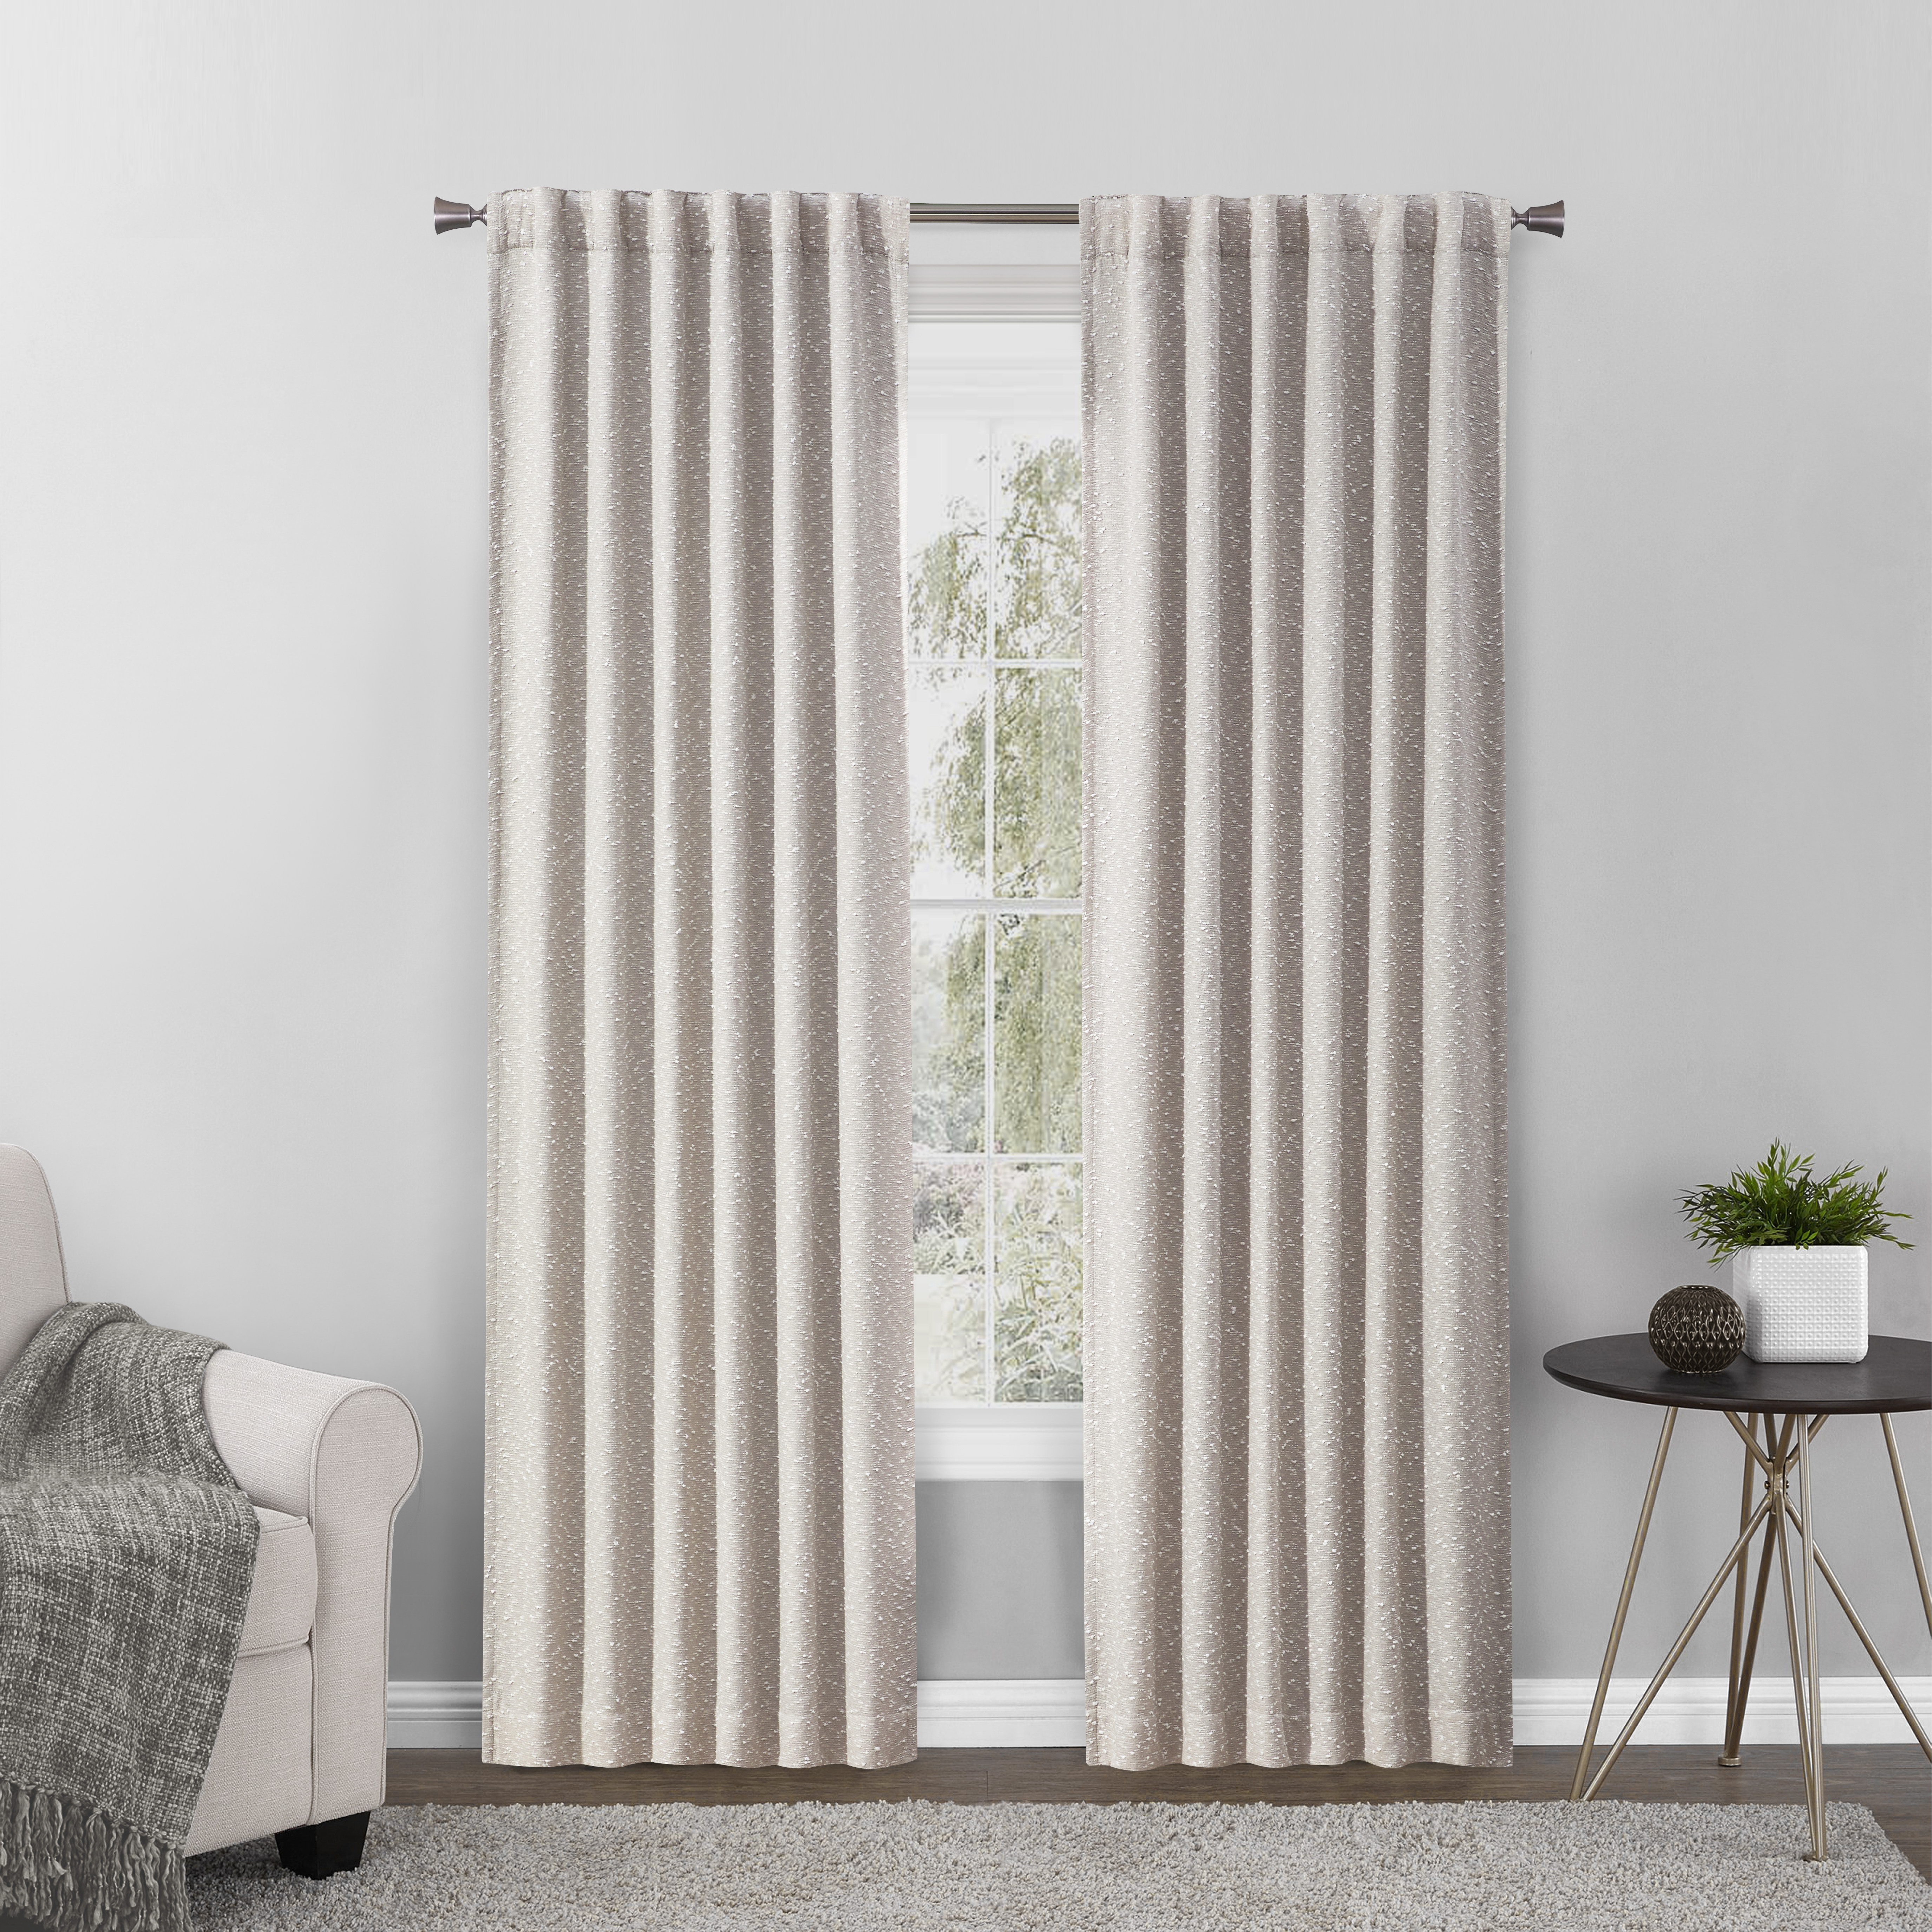 Better Homes & Gardens Boucle Blackout Curtain Panel, 50" x 95", Beige Polyester - image 3 of 7